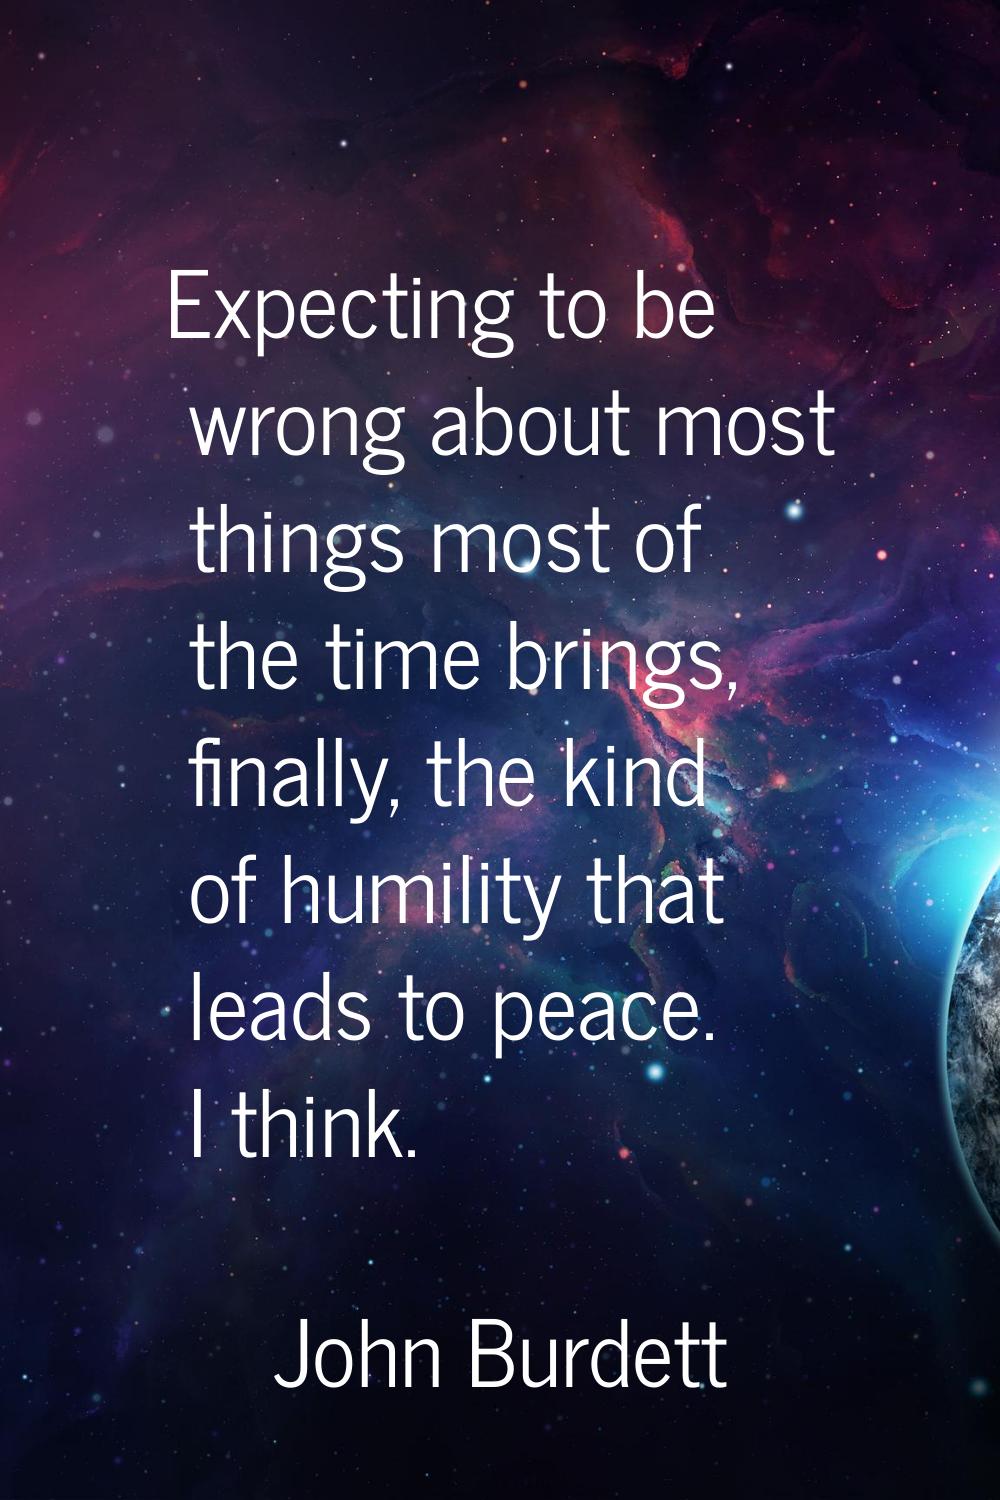 Expecting to be wrong about most things most of the time brings, finally, the kind of humility that